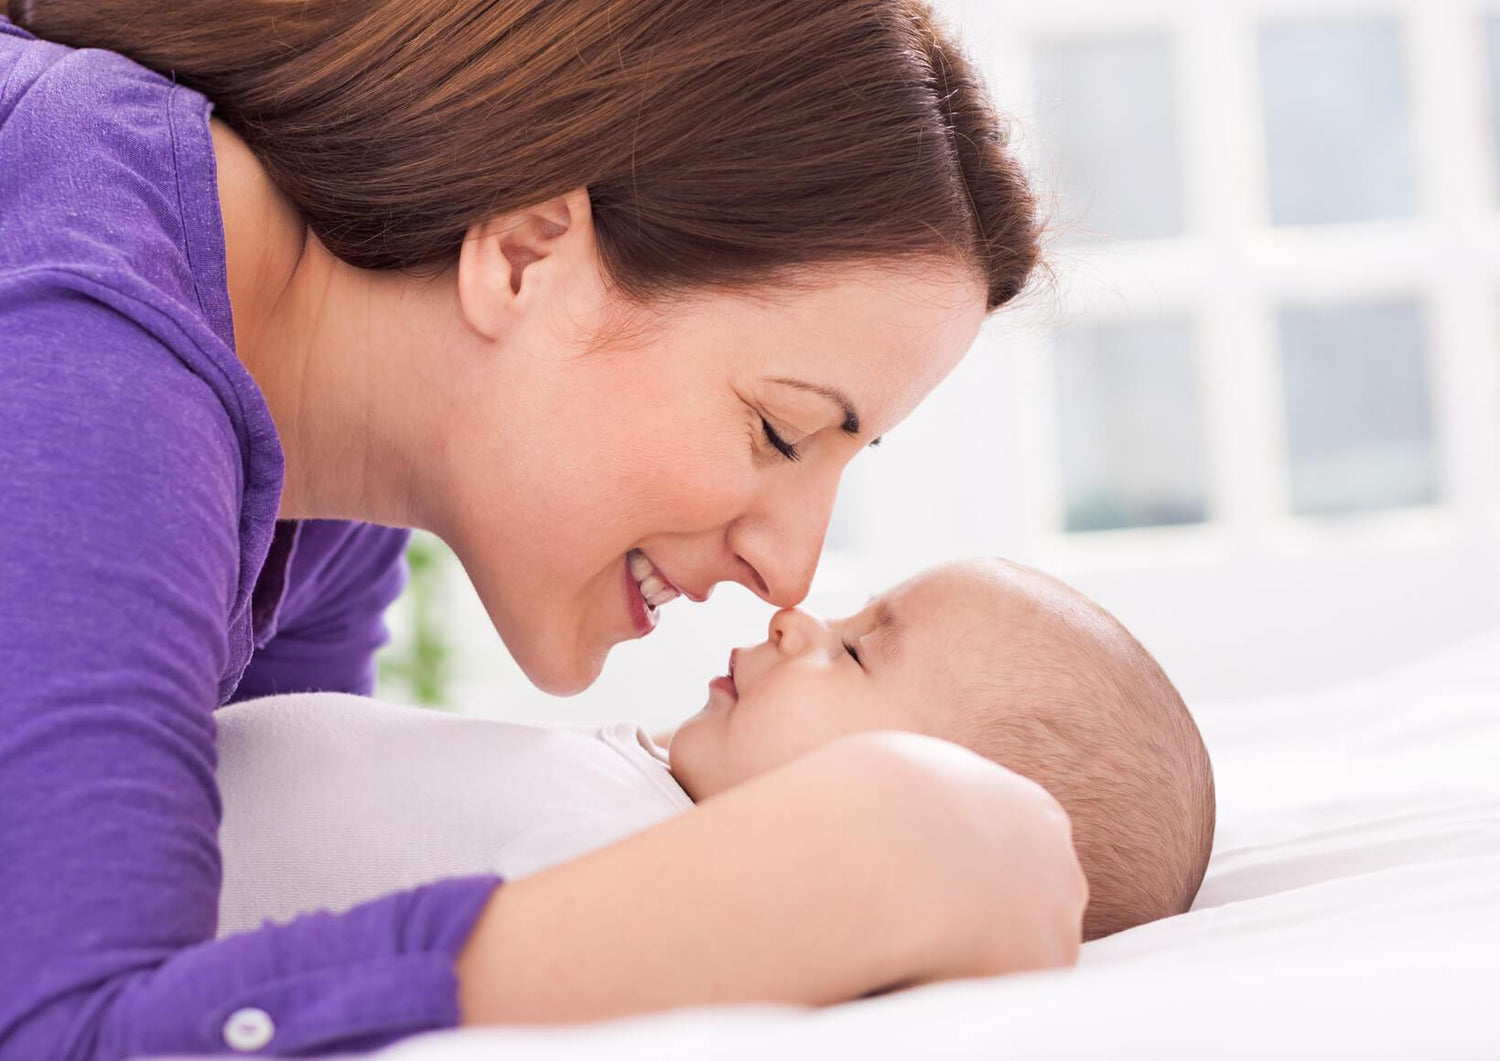 14 Things to Do While You’re Breastfeeding